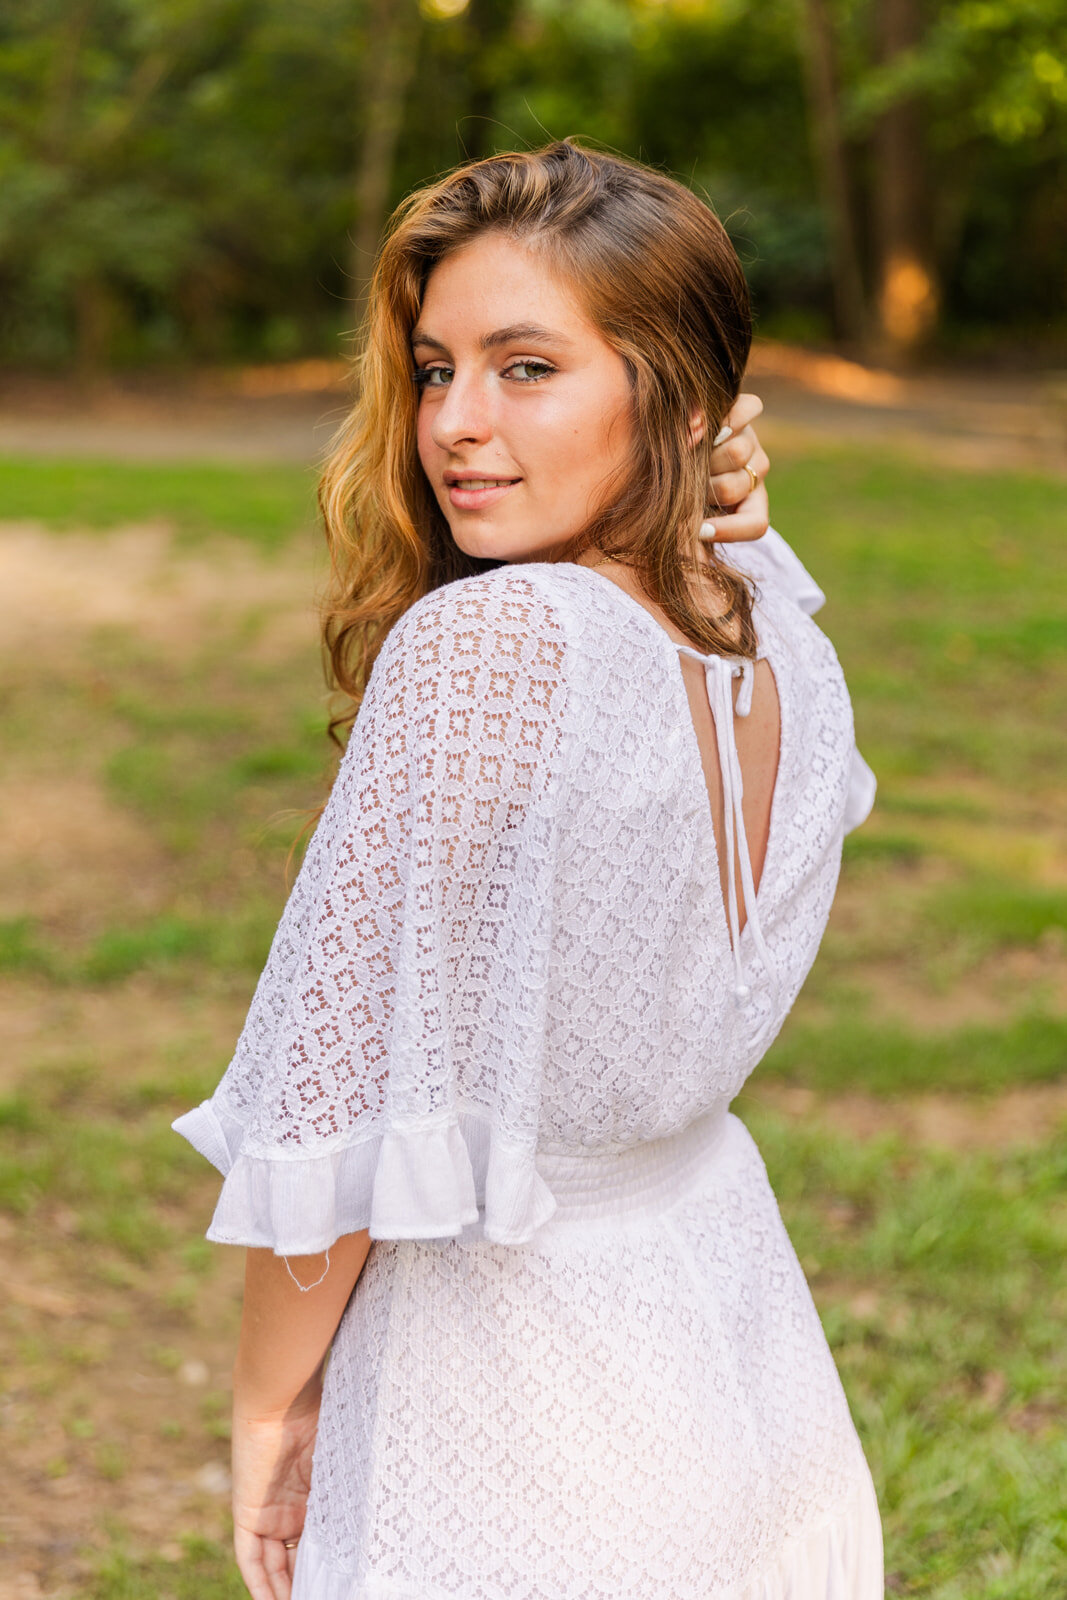 Summer high school senior photo session girl wearing a white dress looking behind her shoulder by photographer Laure Photography